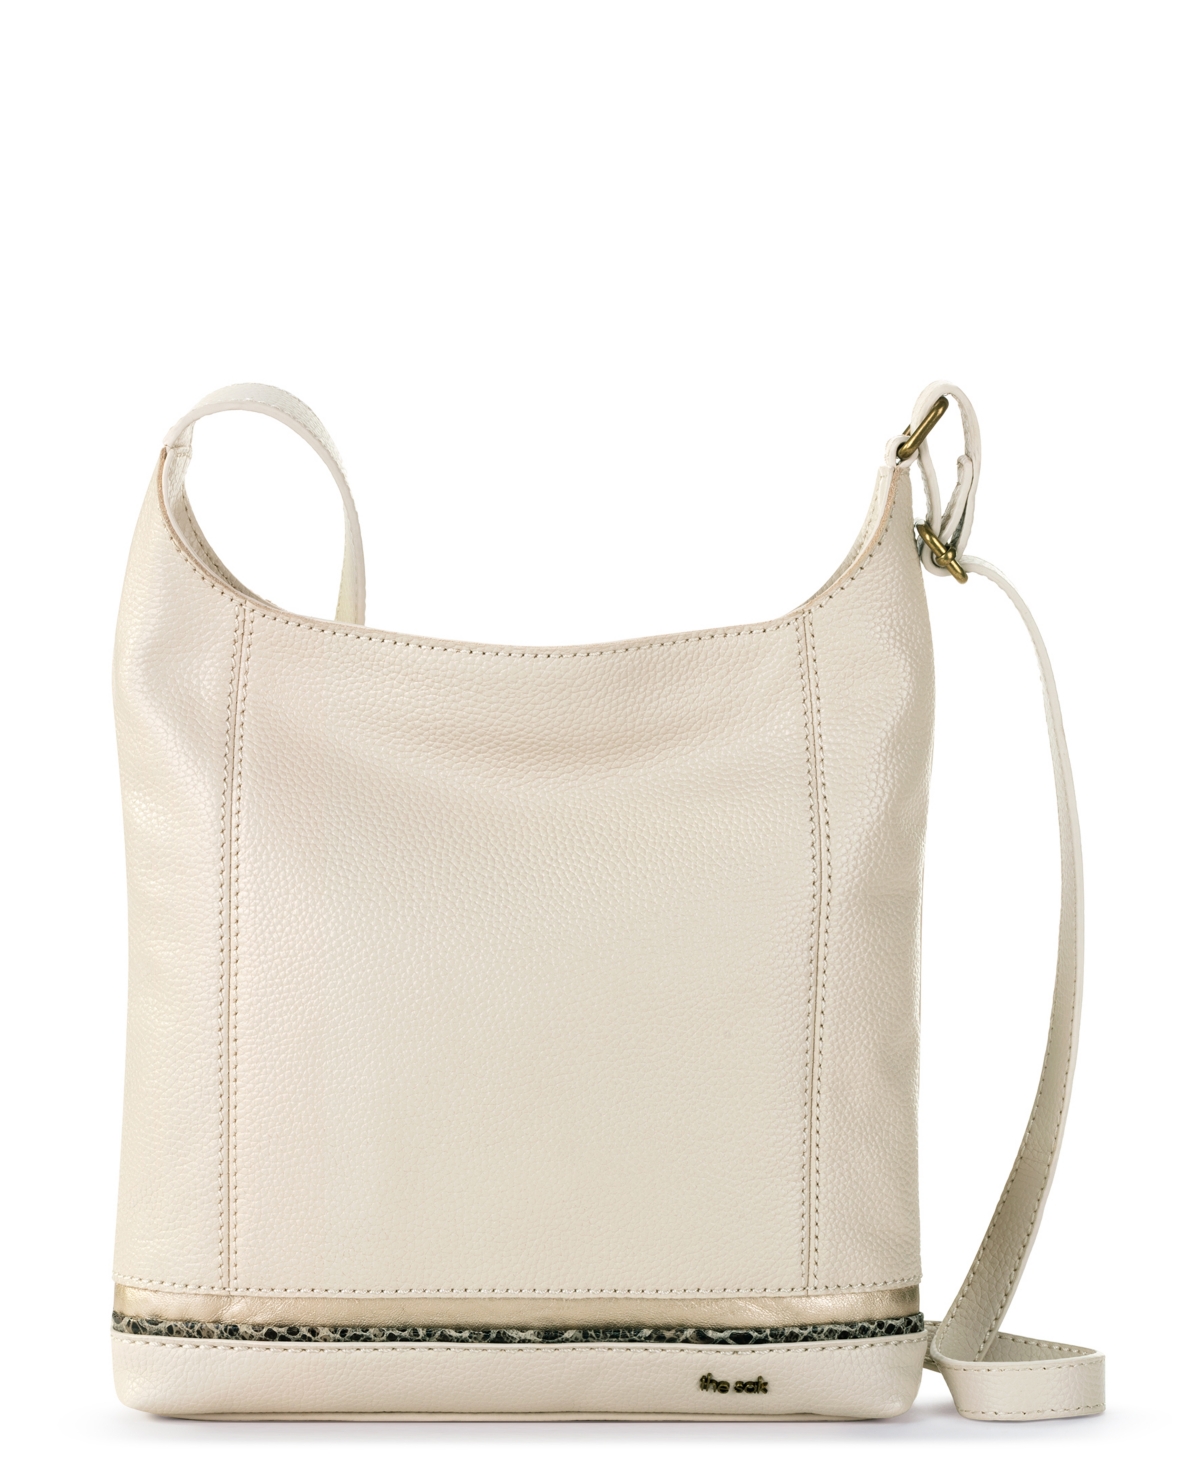 The Sak Women's De Young Small Leather Crossbody In Stone Snake Block